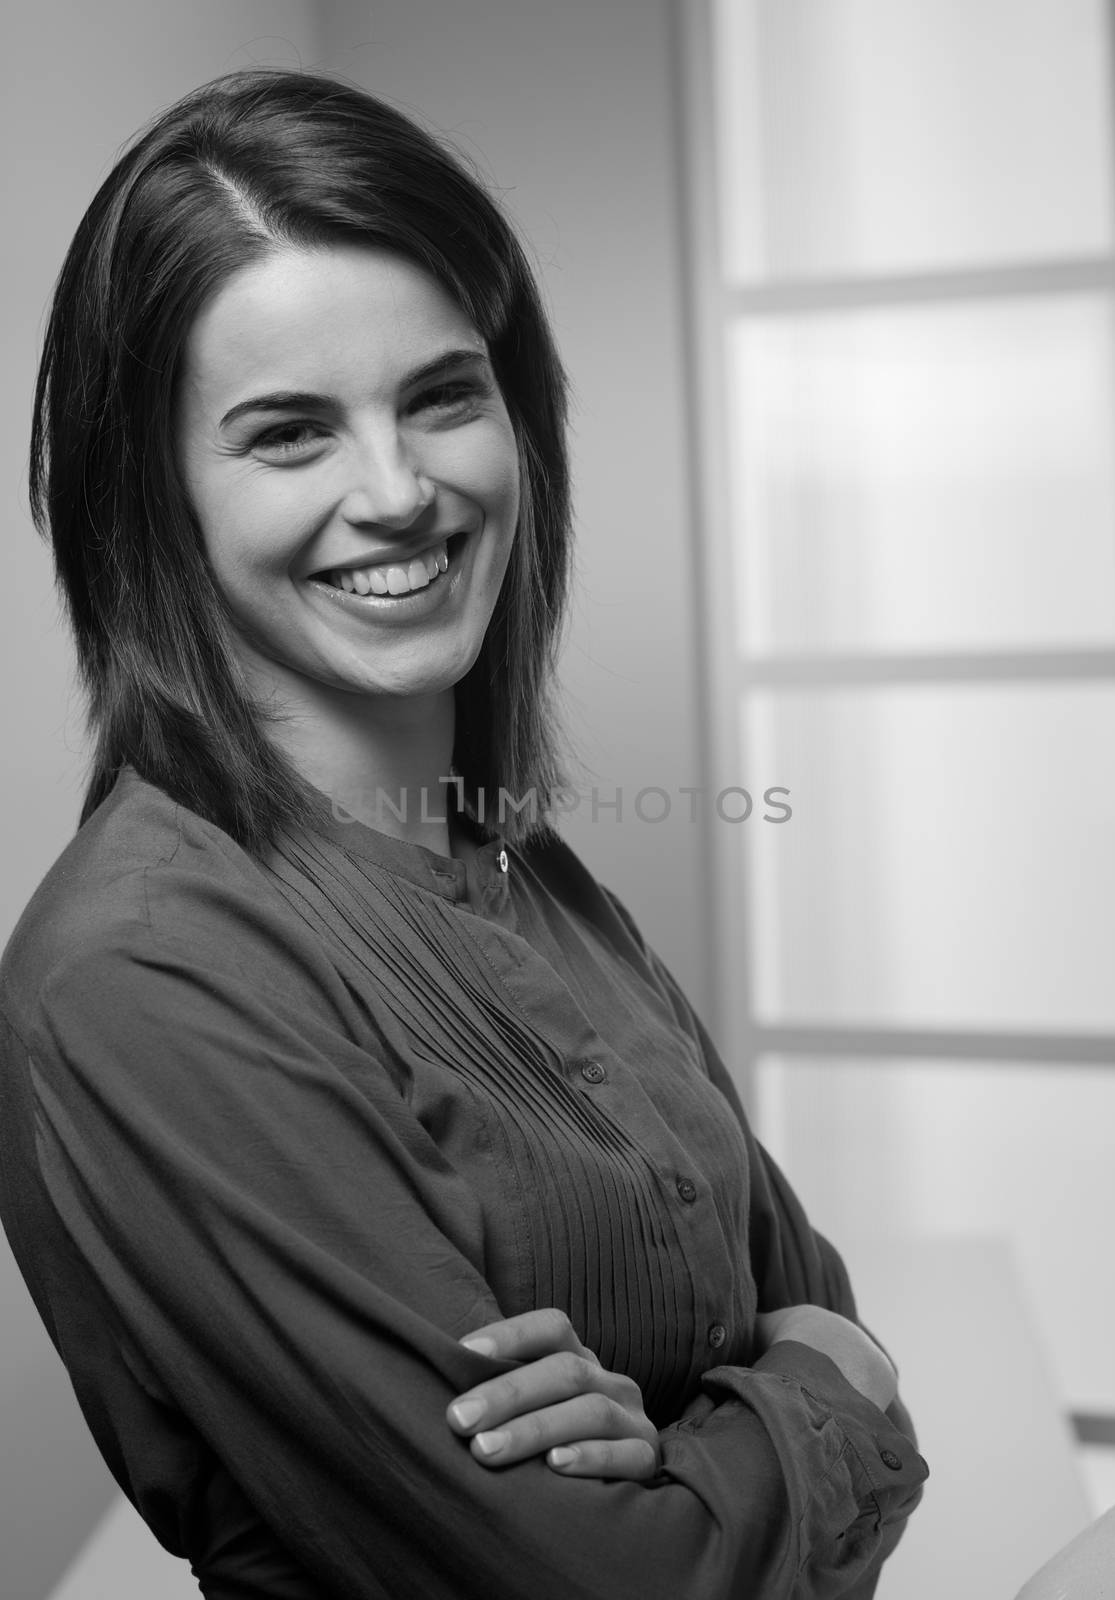 Attractive young woman smiling with arms crossed.